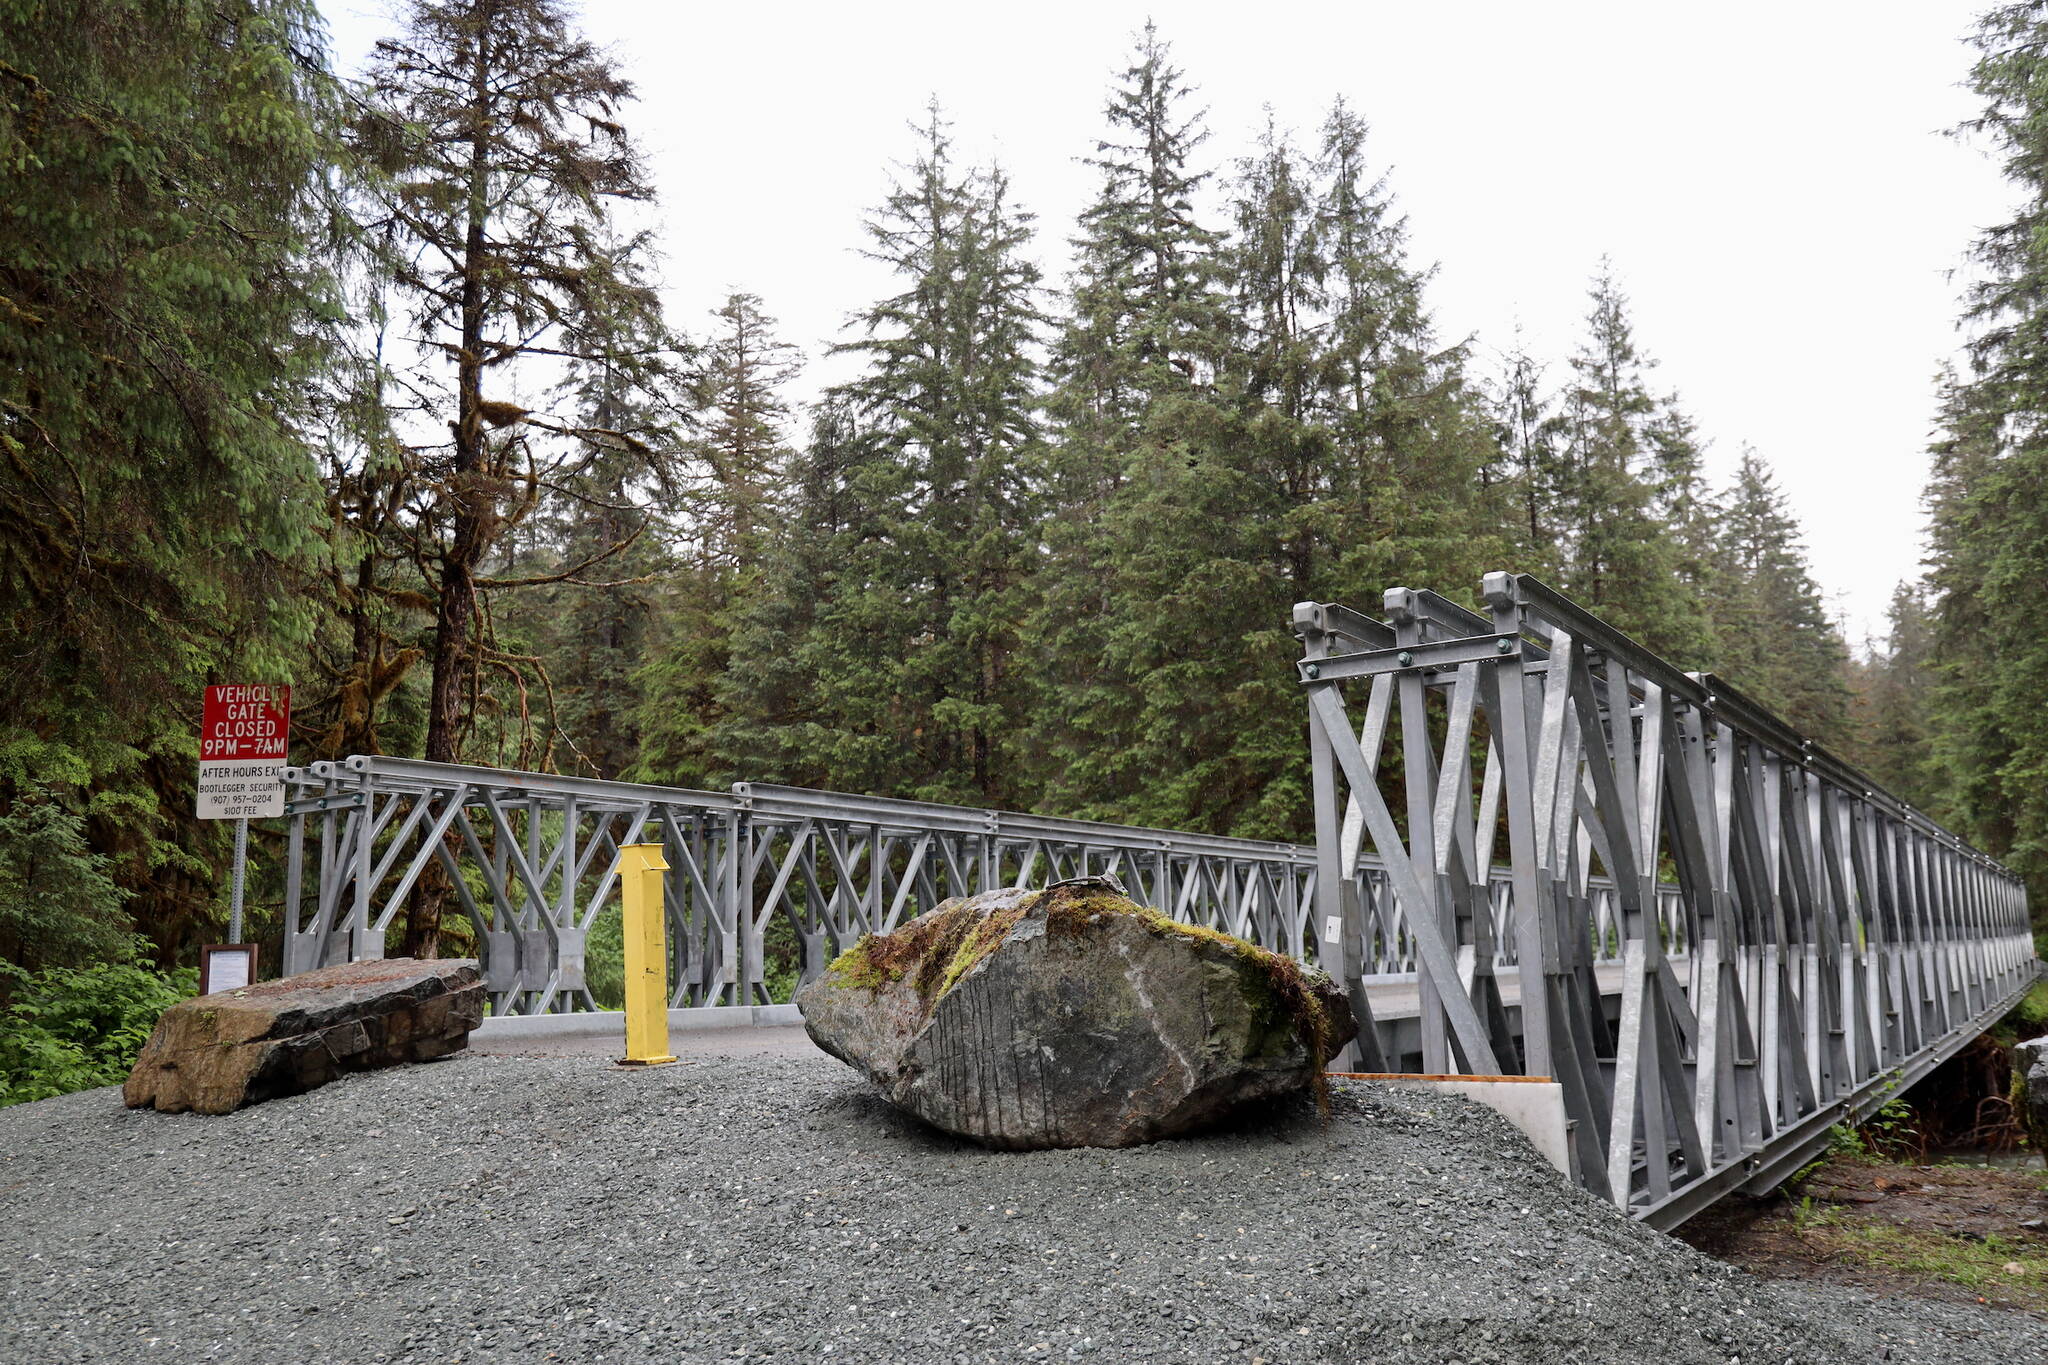 A temporary pedestrian bridge over Montana Creek, seen here Thursday, is now open as a replacement for the bridge that suffered substructure damage from weather events last September. (Clarise Larson / Juneau Empire)